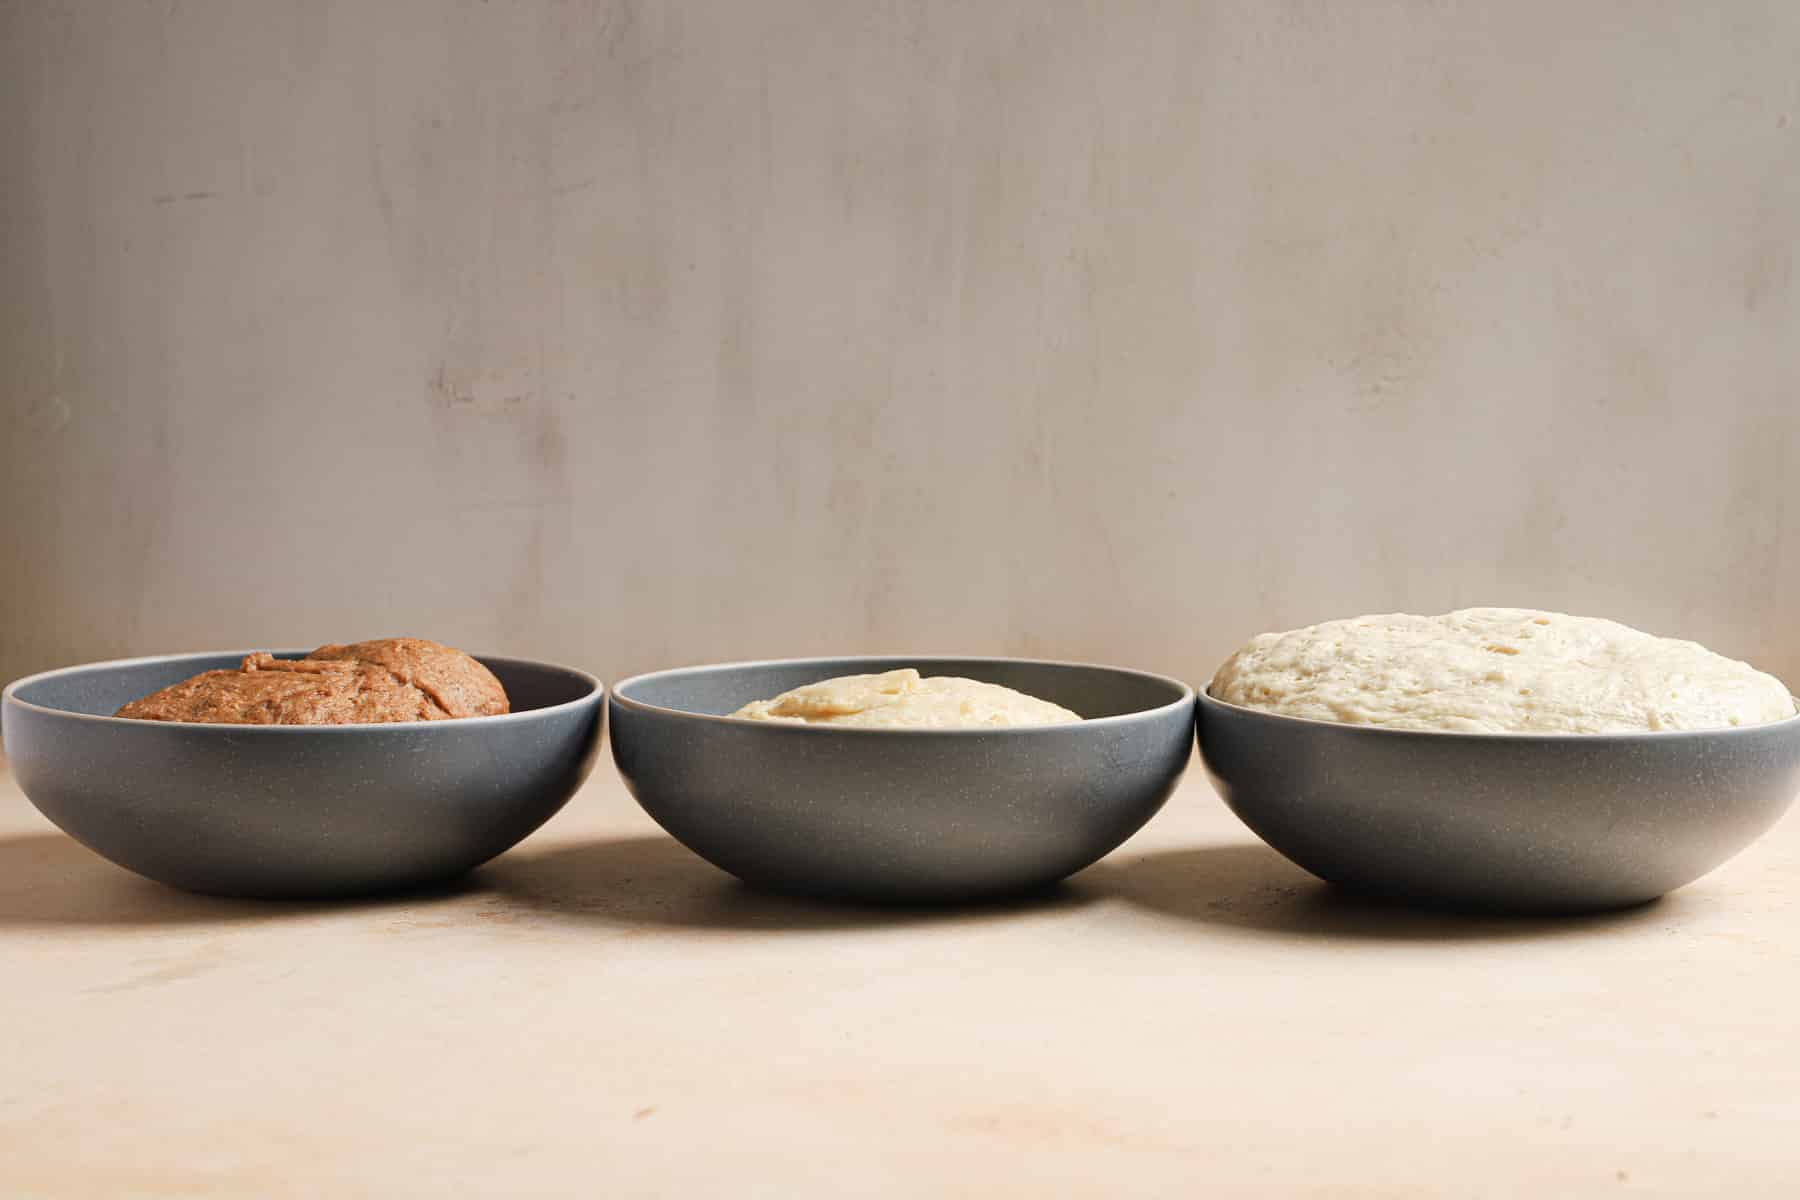 Three bowls with different doughs showing rising height.